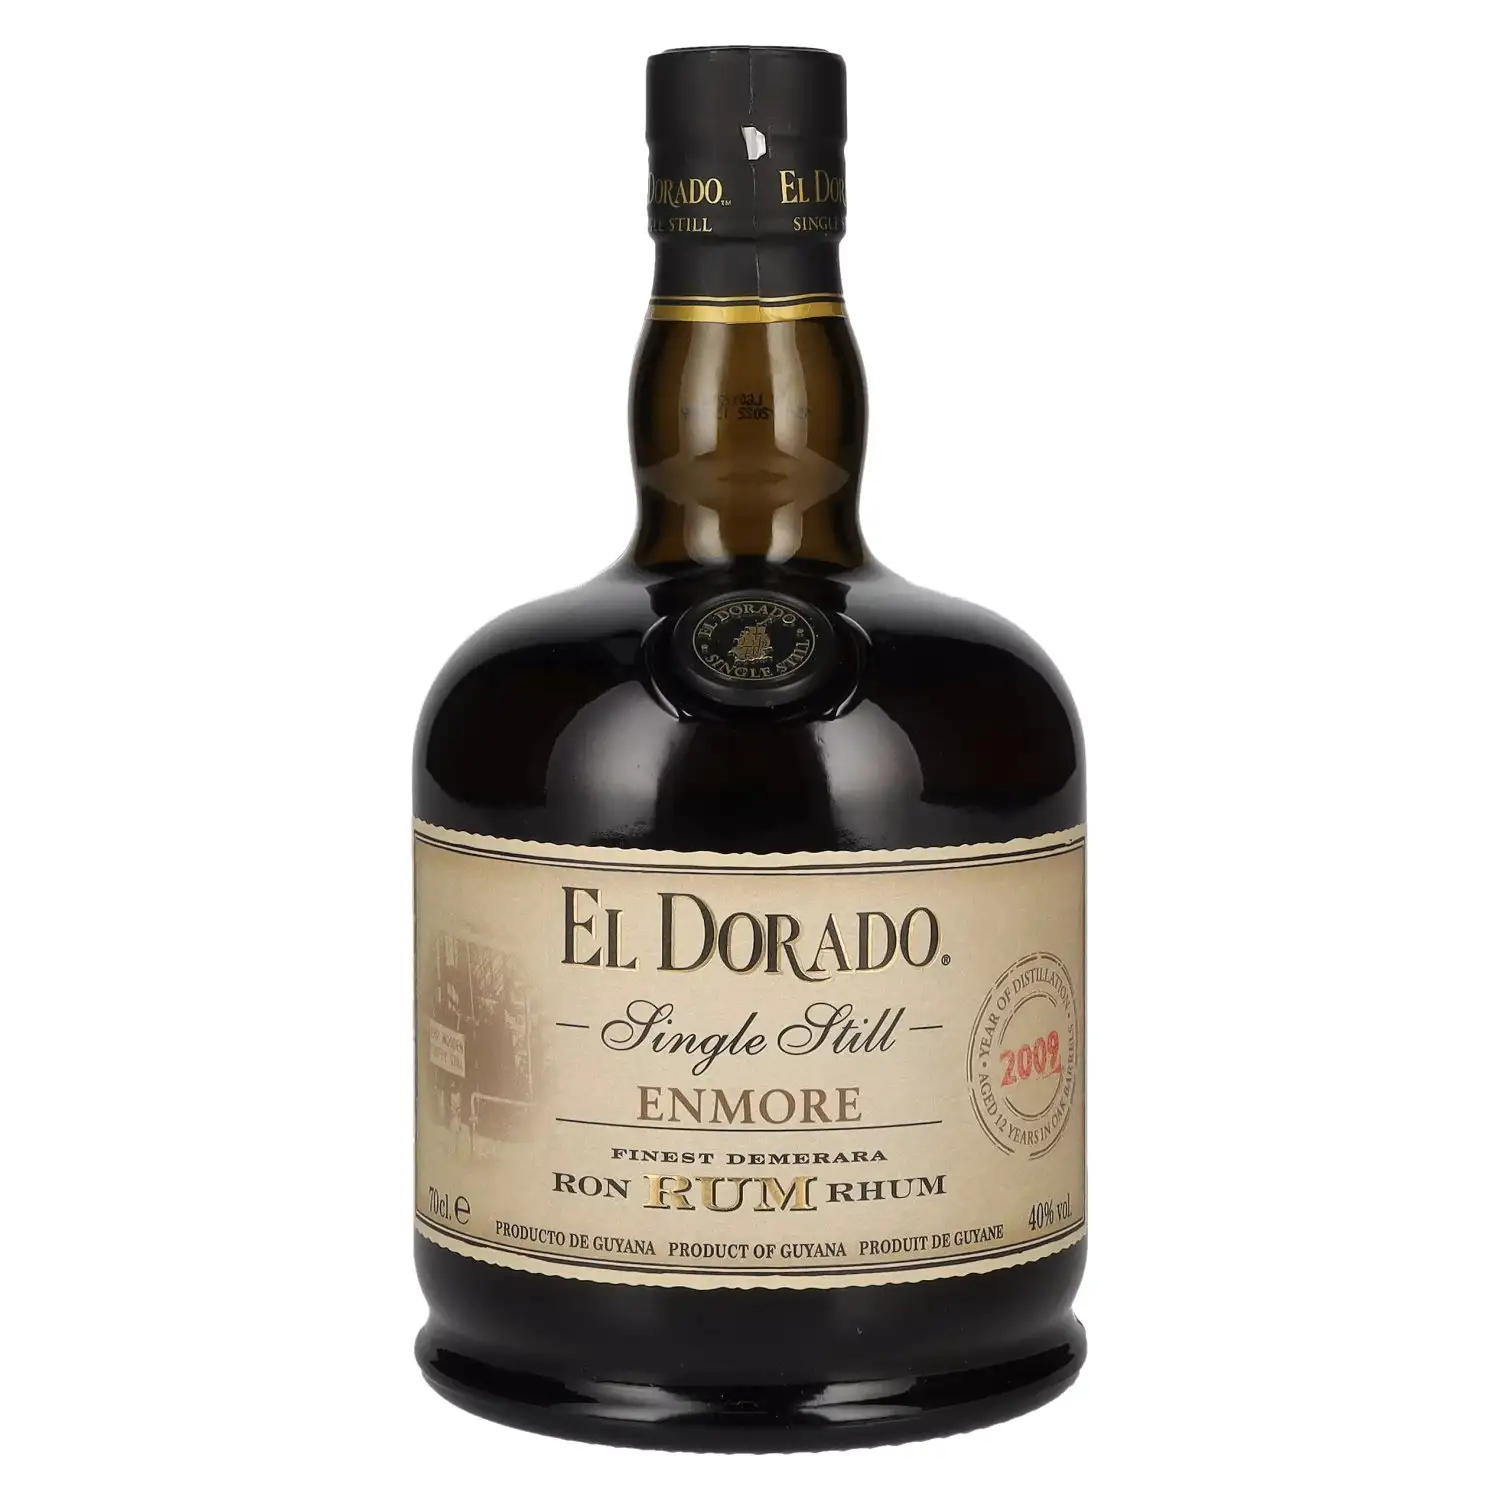 Image of the front of the bottle of the rum El Dorado Single Still Enmore